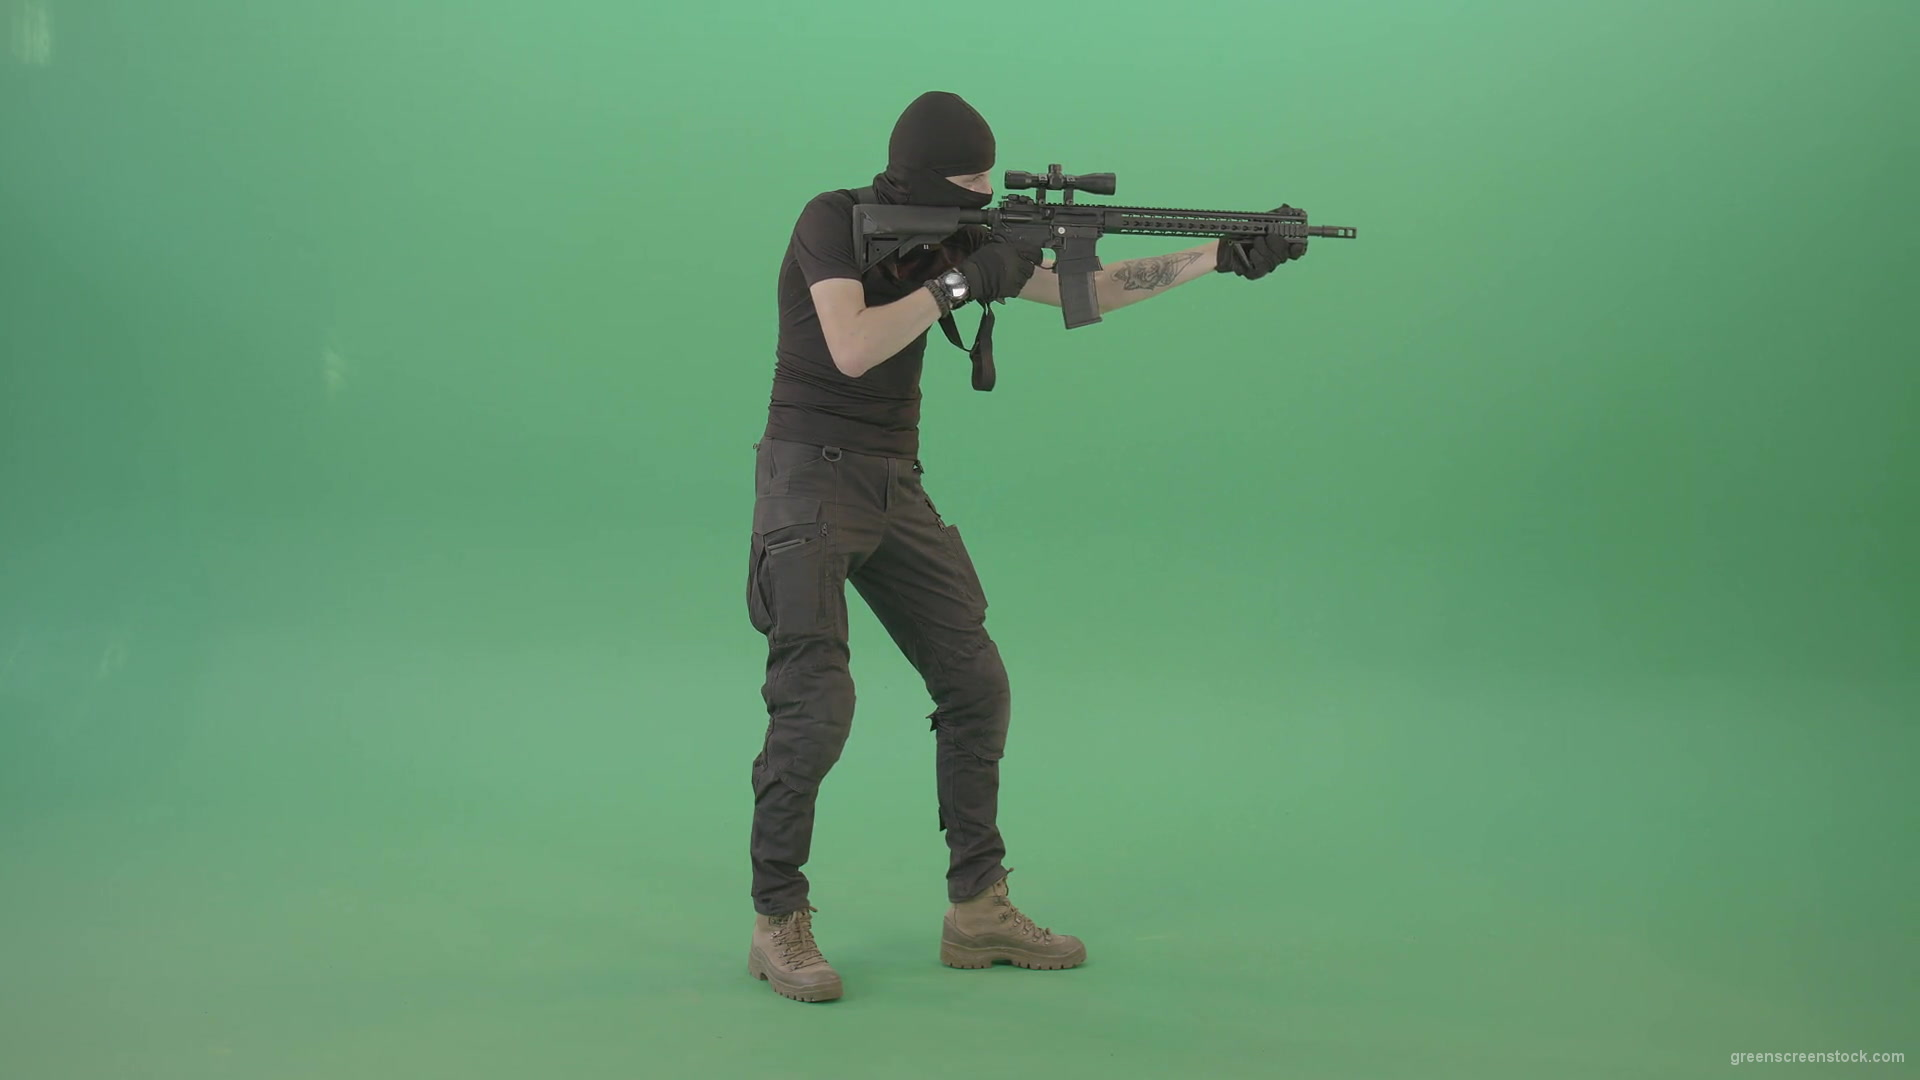 Army-soldier-shooting-with-gun-on-green-screen-4K-Video-Clip-1920_004 Green Screen Stock